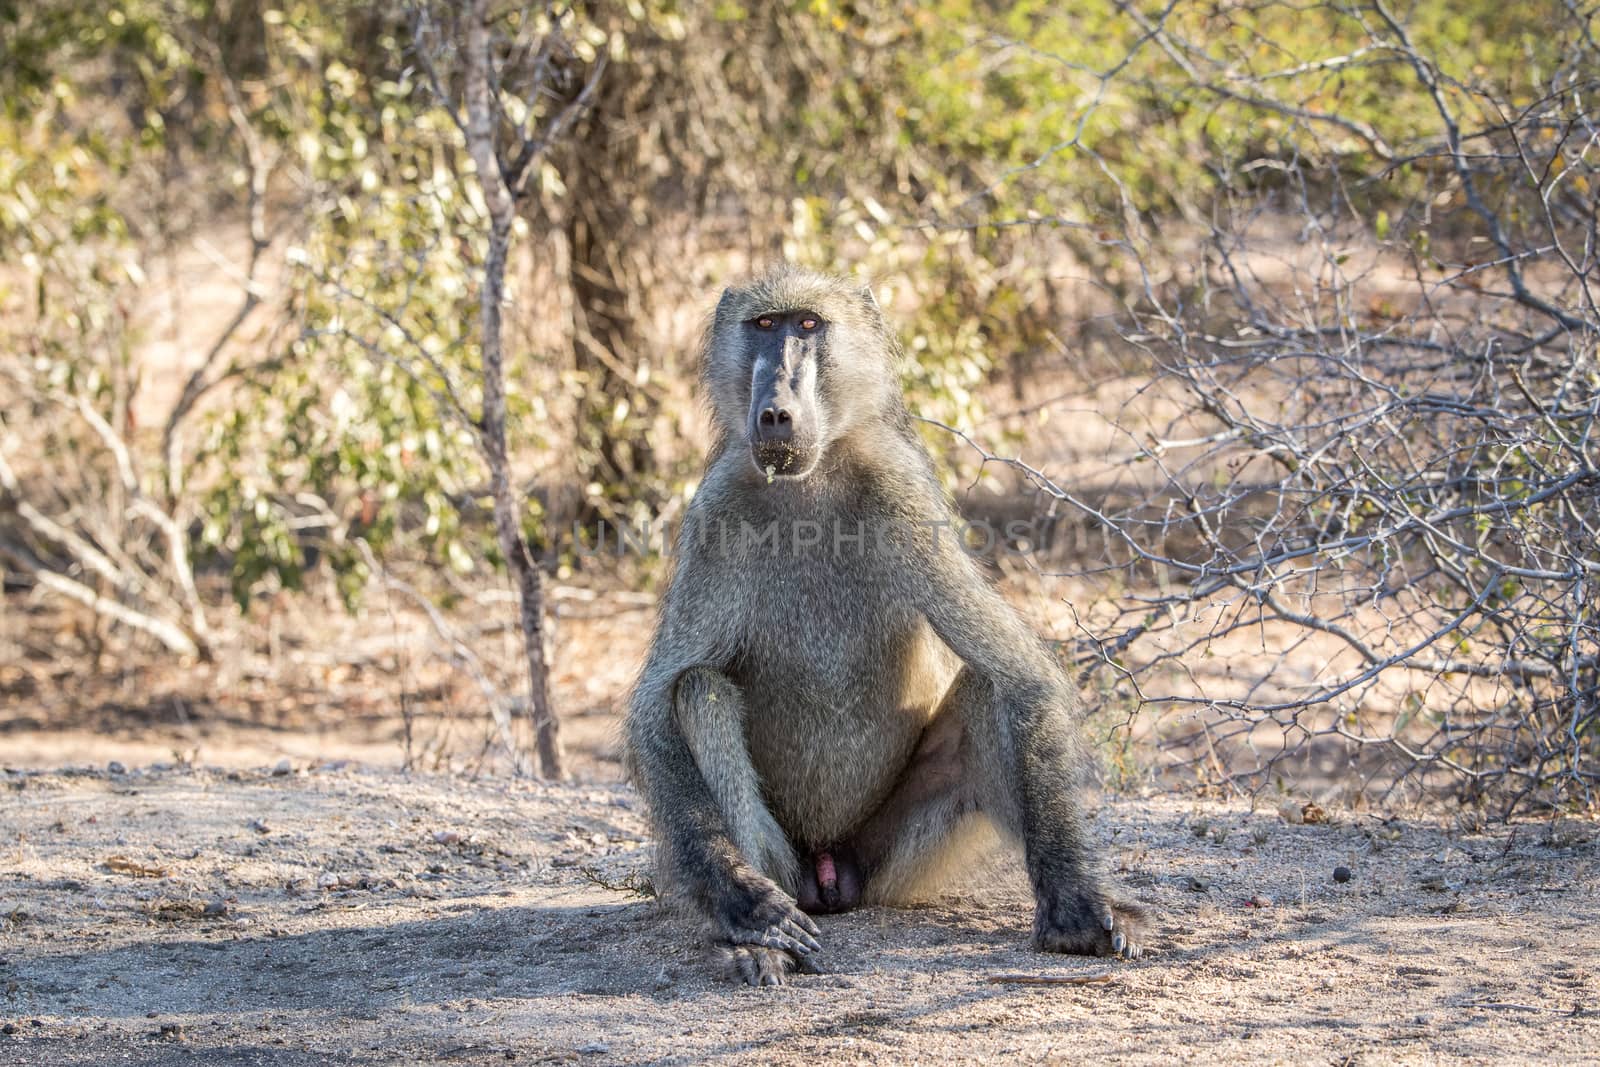 A starring Baboon in the Kruger National Park, South Africa.